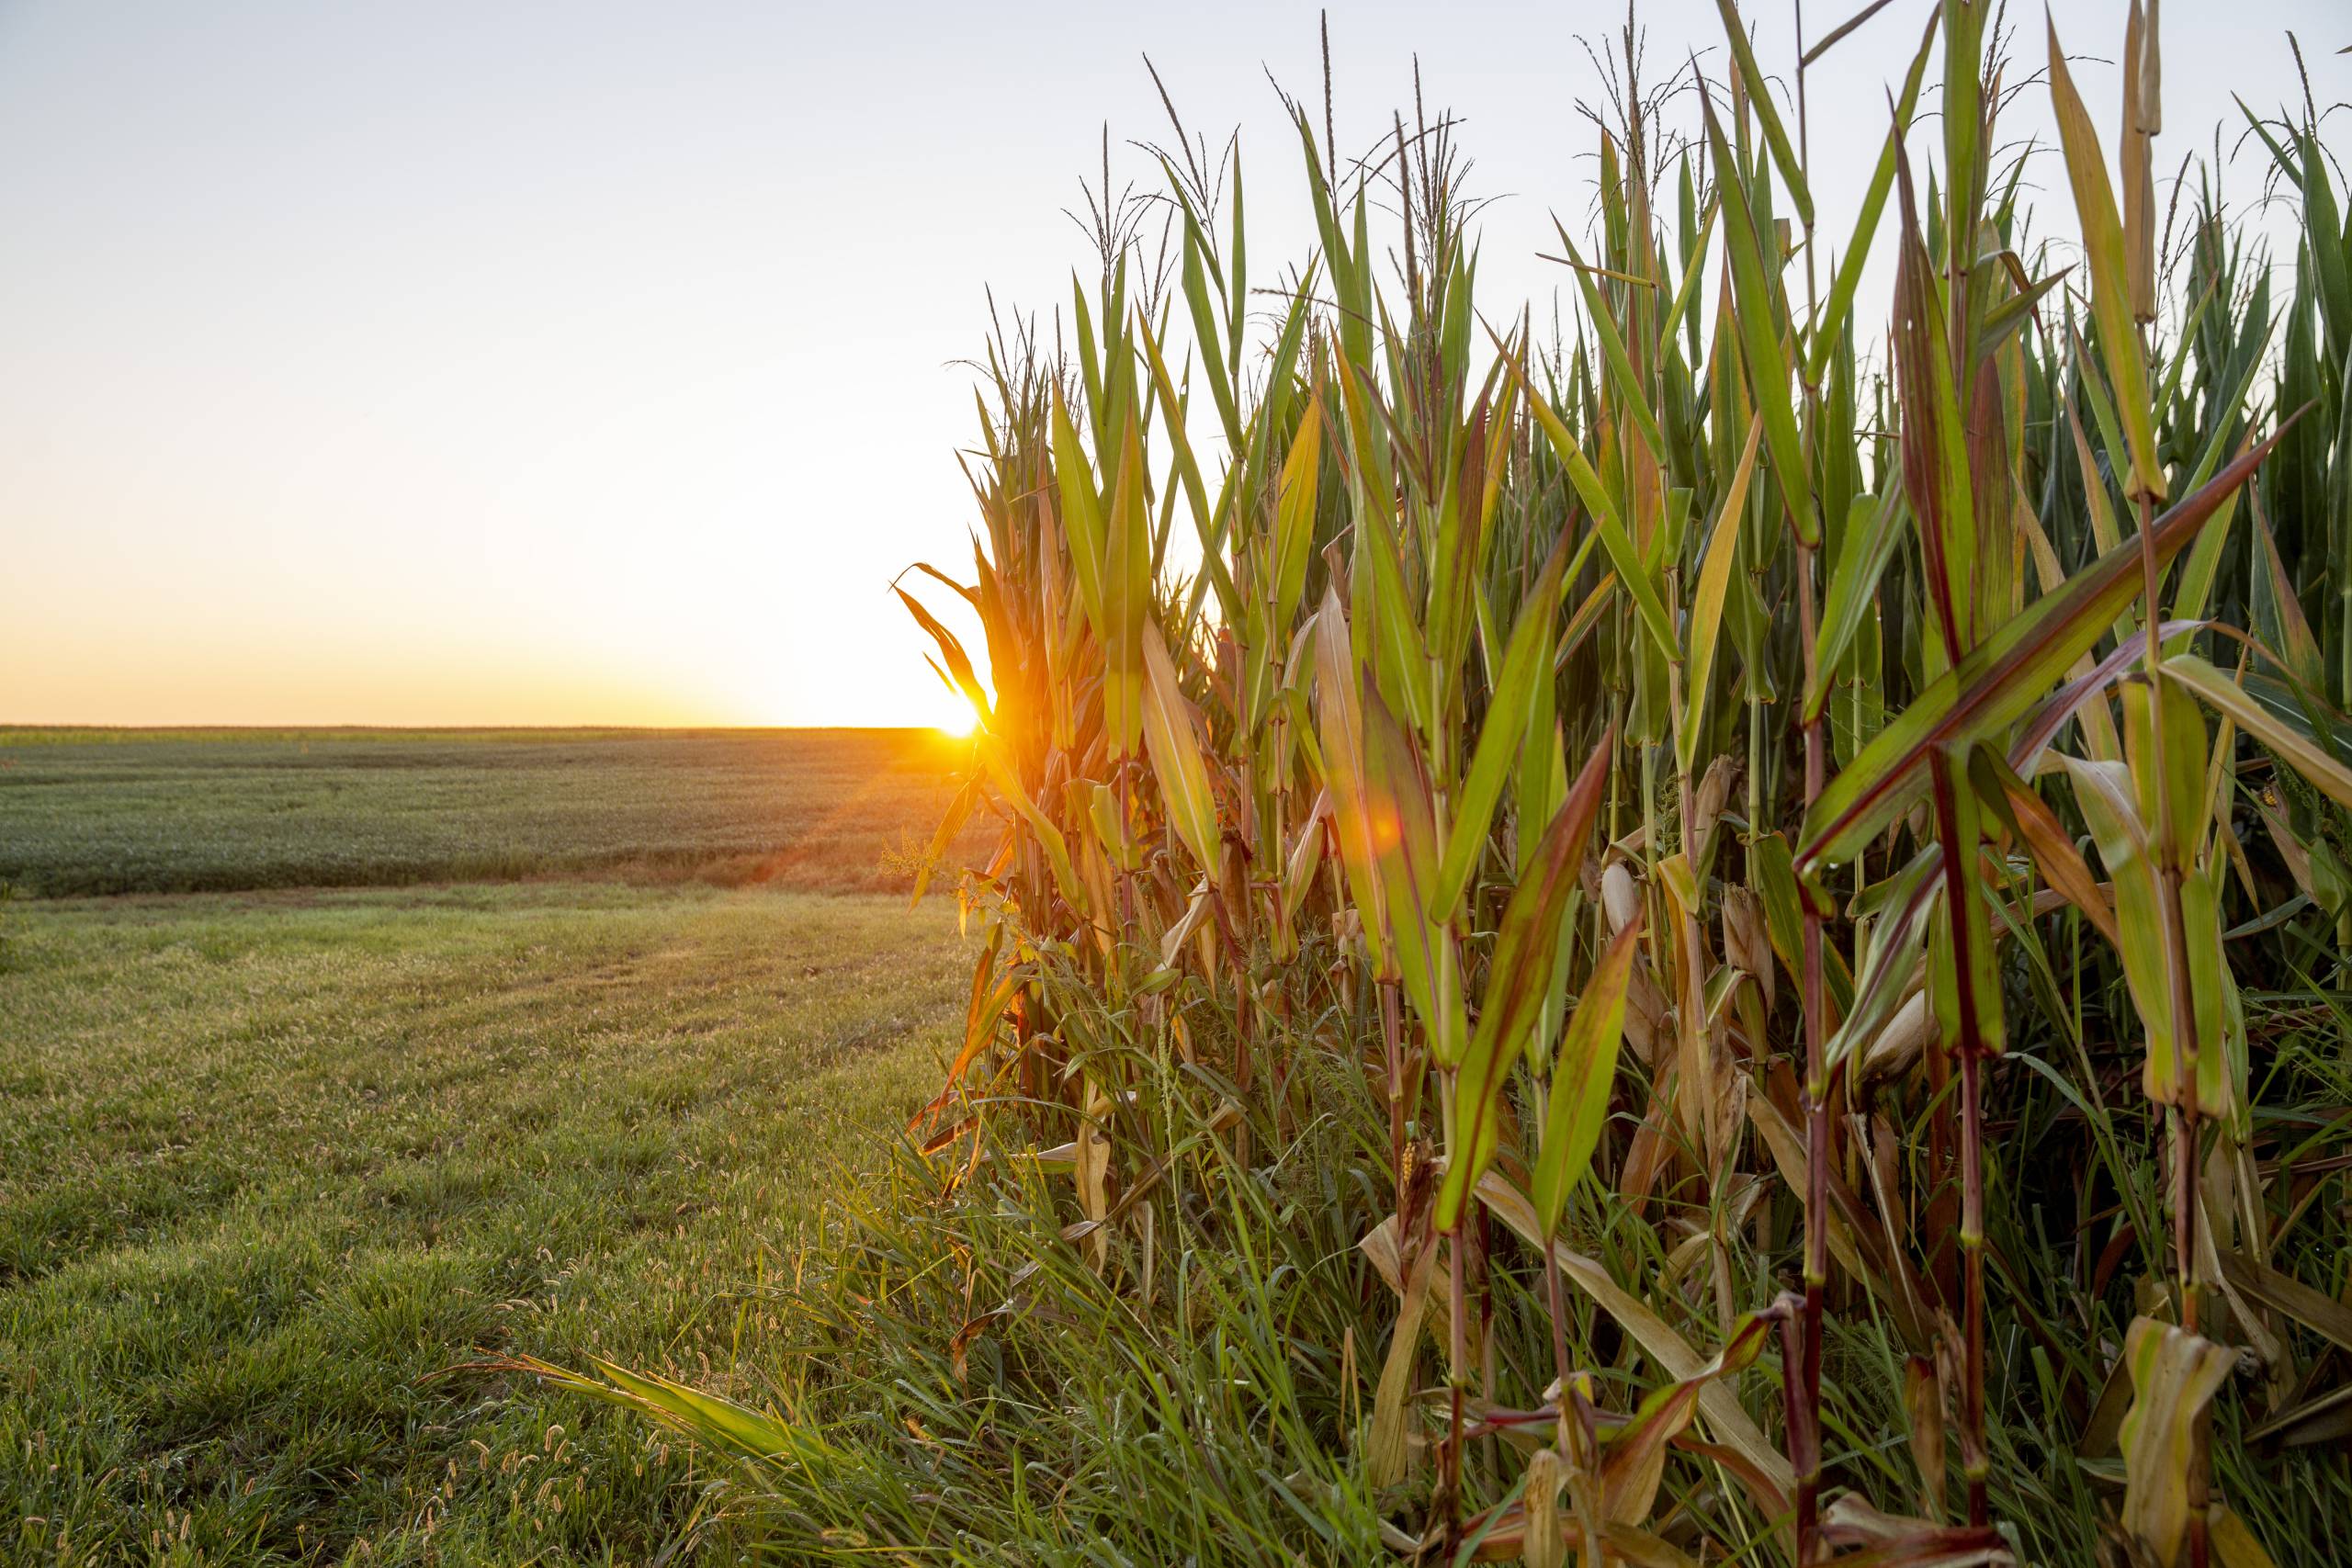 CAFNR Institute Updates Baseline Food and Agricultural Outlook Report (click to read)